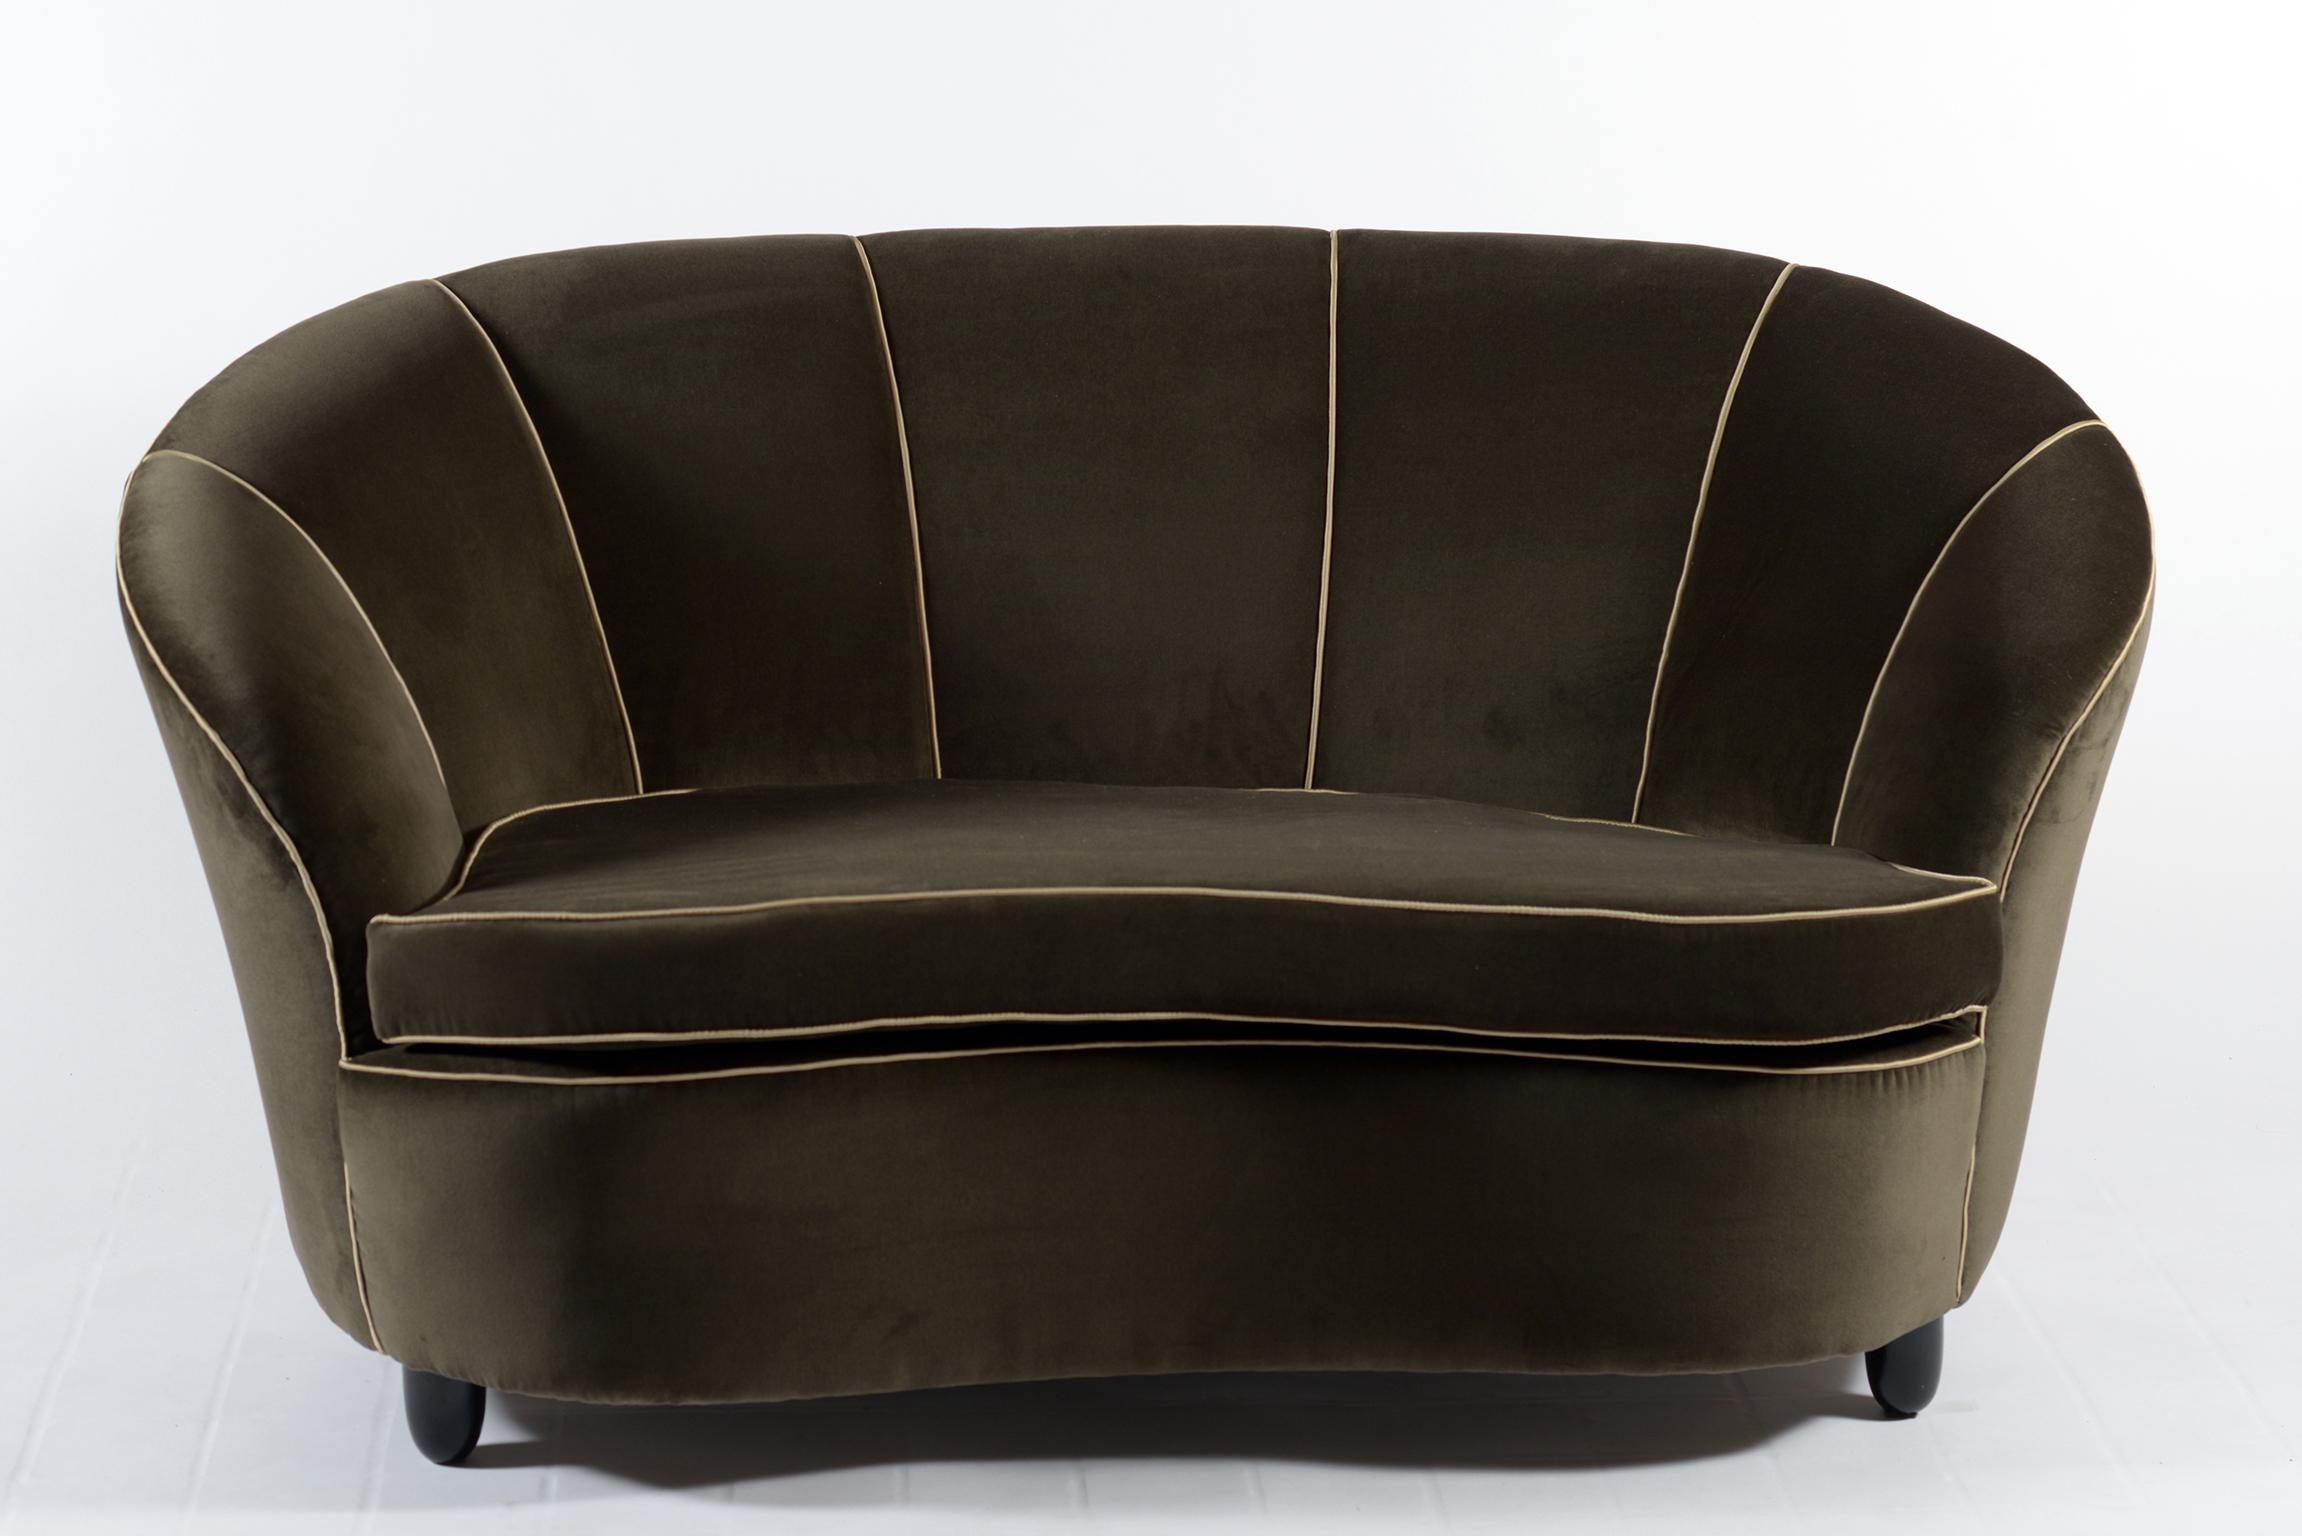 Italian midcentury curved sofa newly upholstered with grey smok color velvet, black lacquered wood legs.
Italy, 1940s.